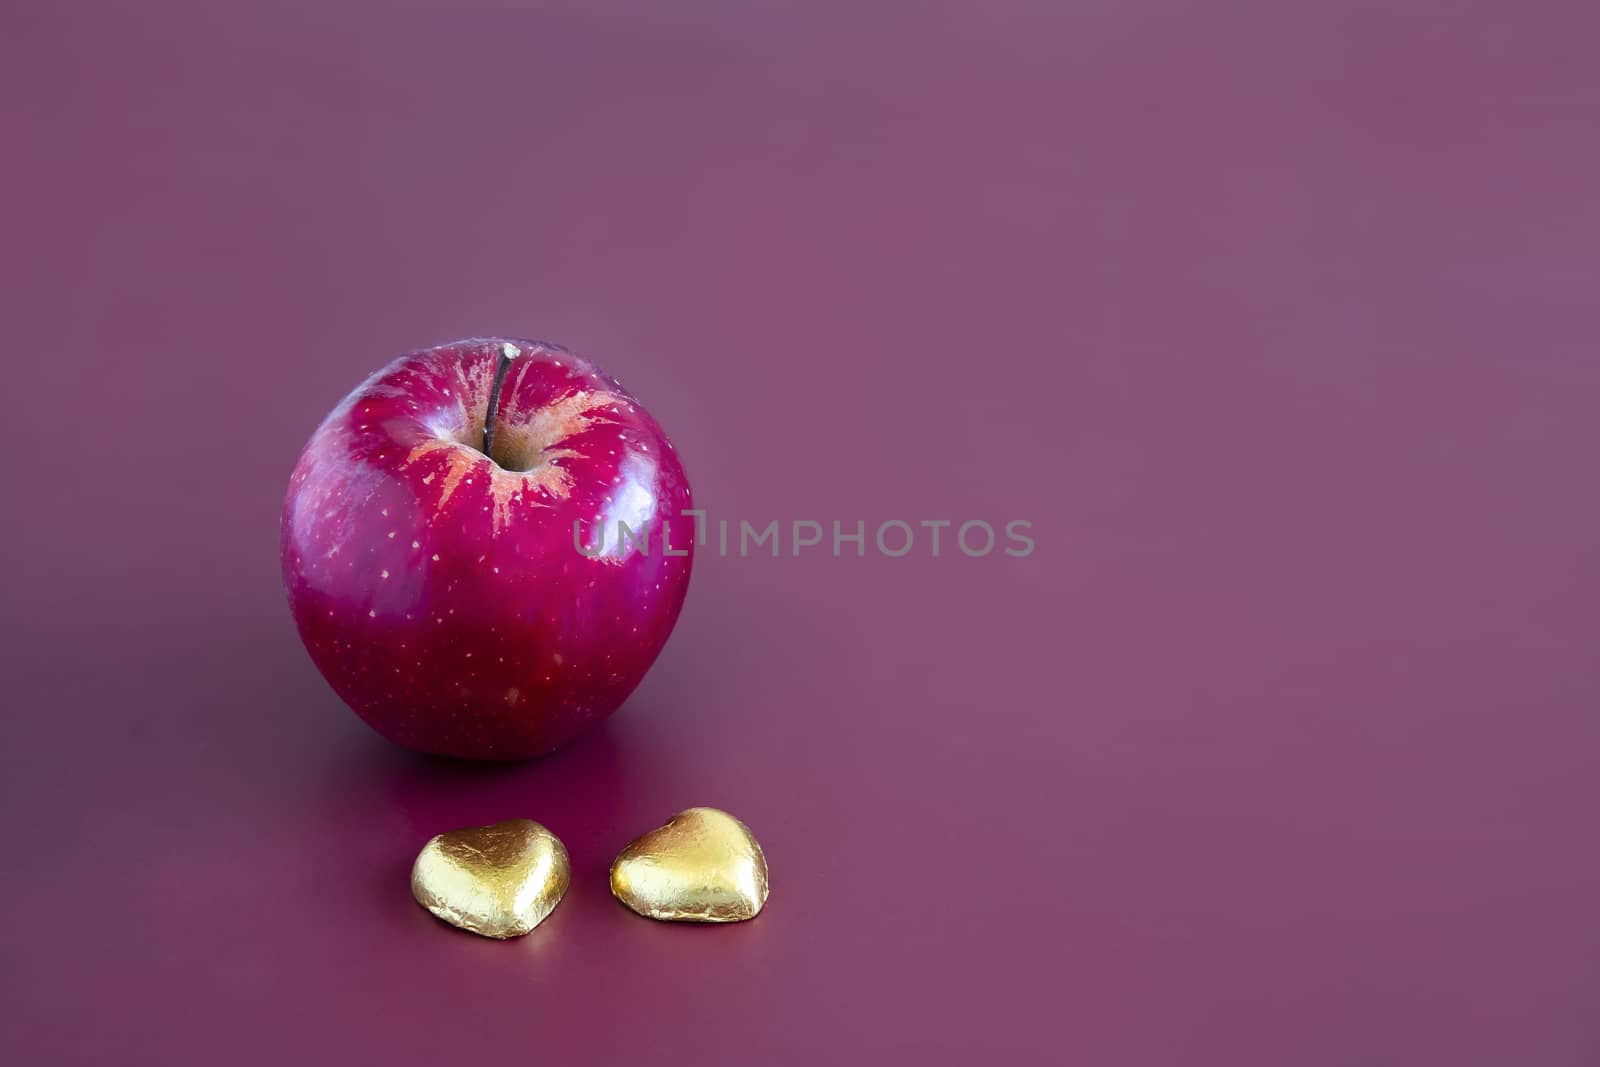 Closeup of a red gala apple with two heart shape chocolate candy. Mahogany background.